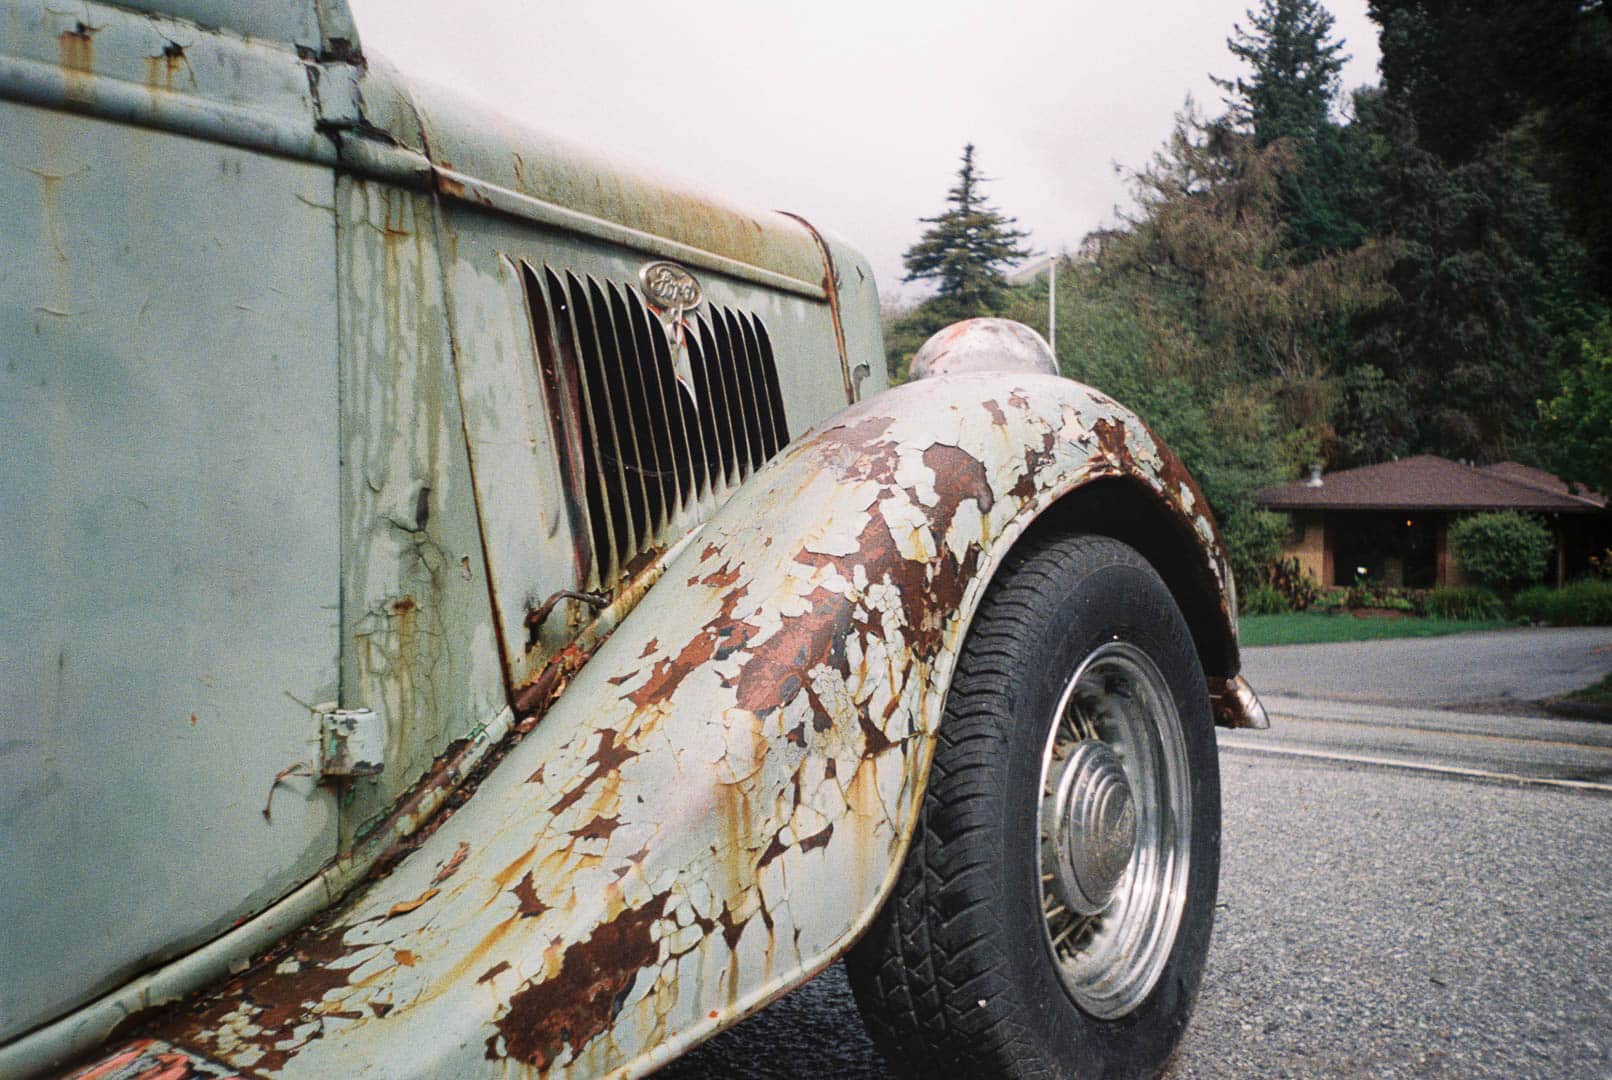 Old 1930s era Ford with weathered and pealing pale green paint in a light rain